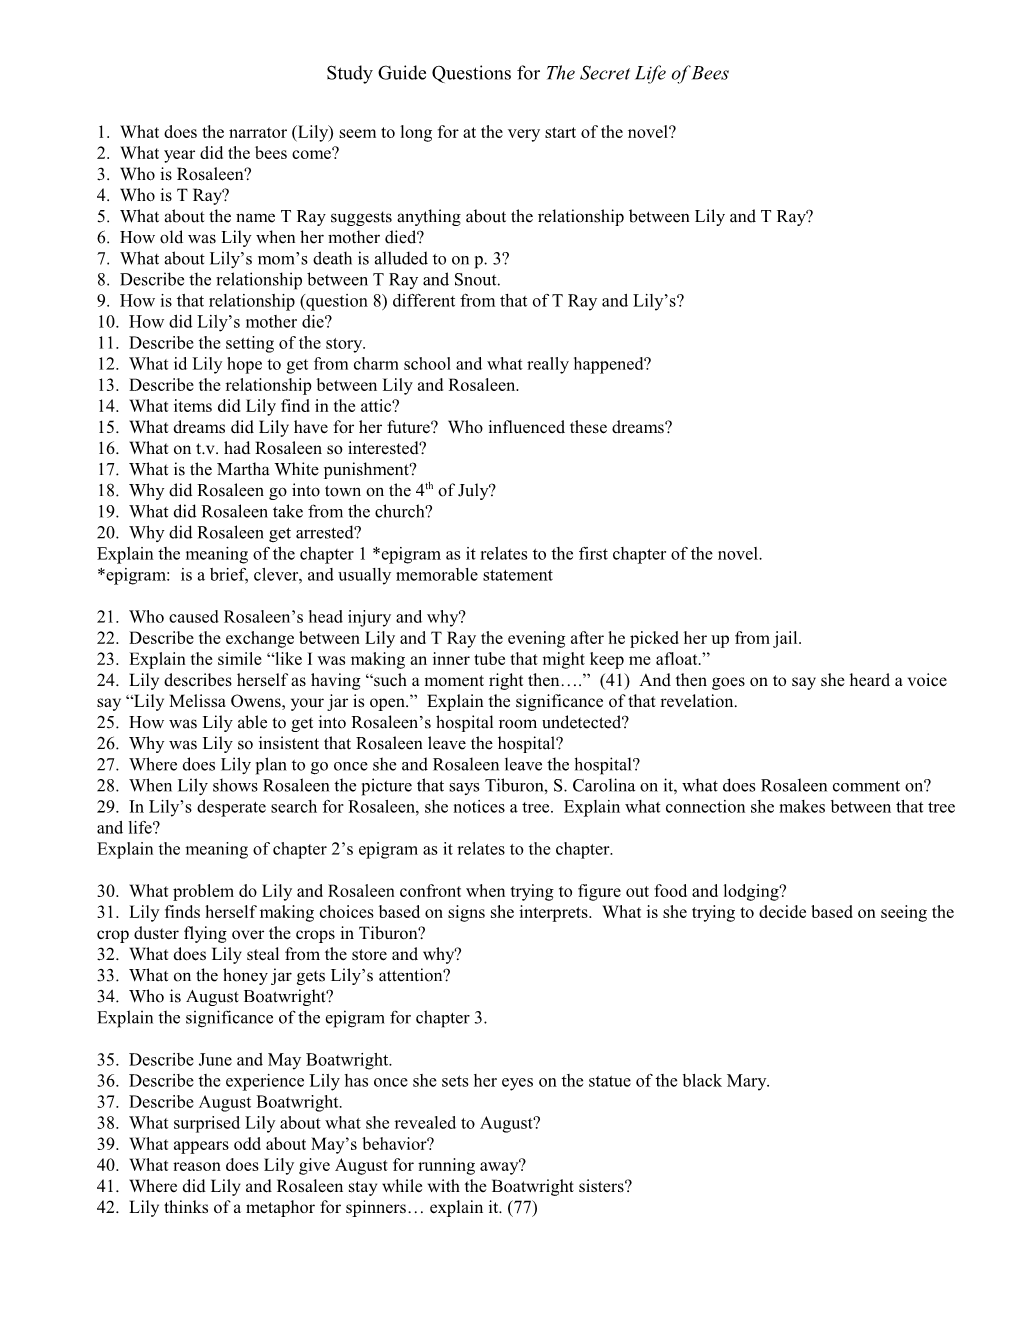 Study Guide Questions for the Secret Life of Bees